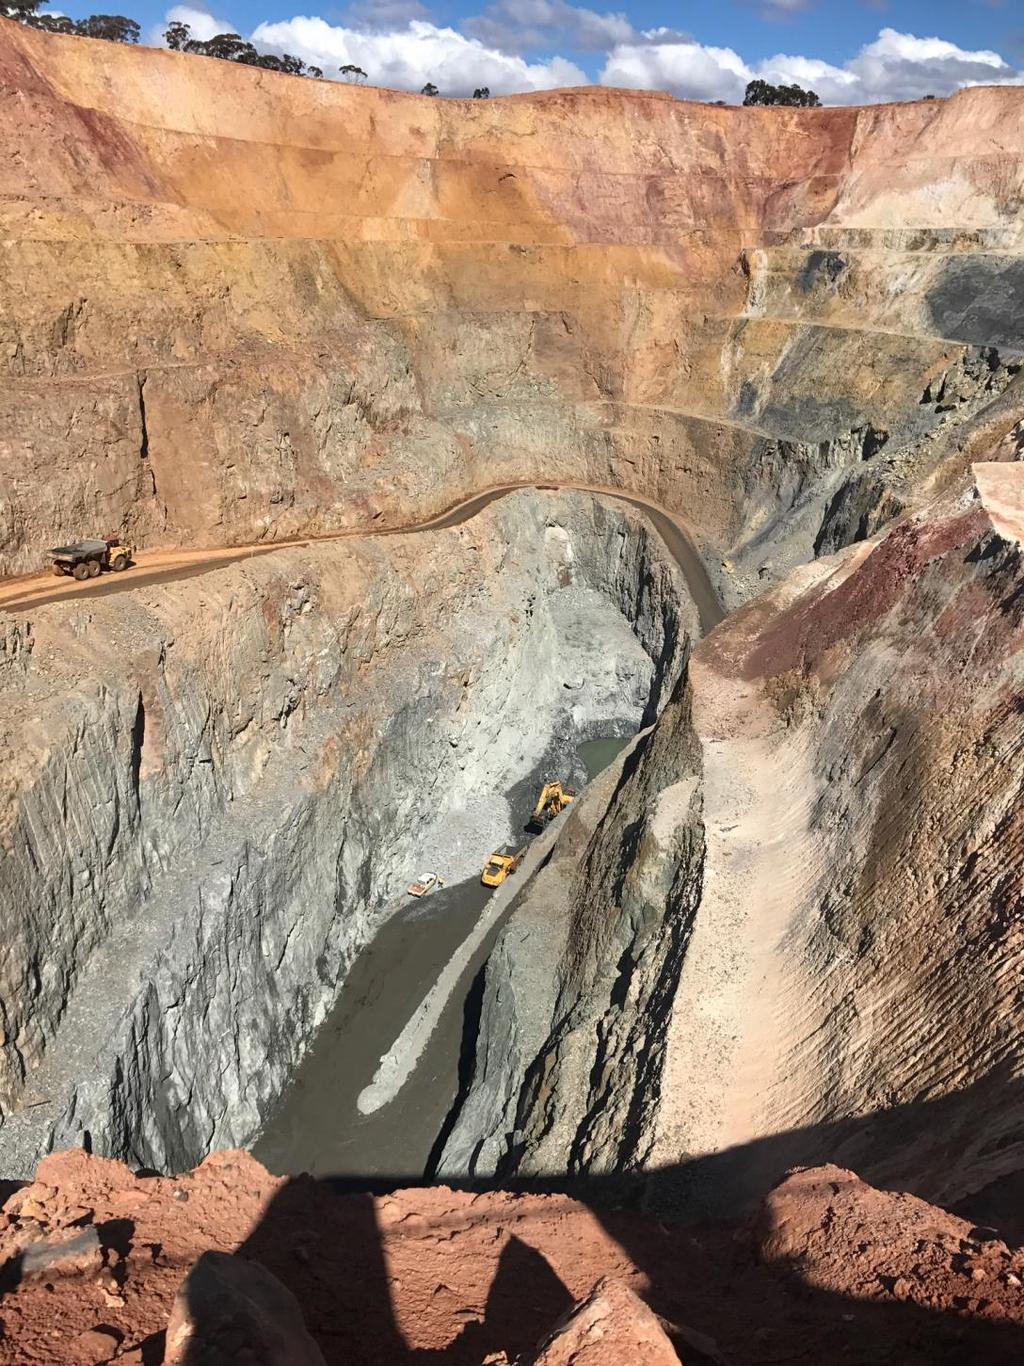 Financial Processing of the last ore stockpiles from the Zoroastrian Central Open Pit was completed on 22 September 2017 and final revenue from gold sales was received by the end of October resulting